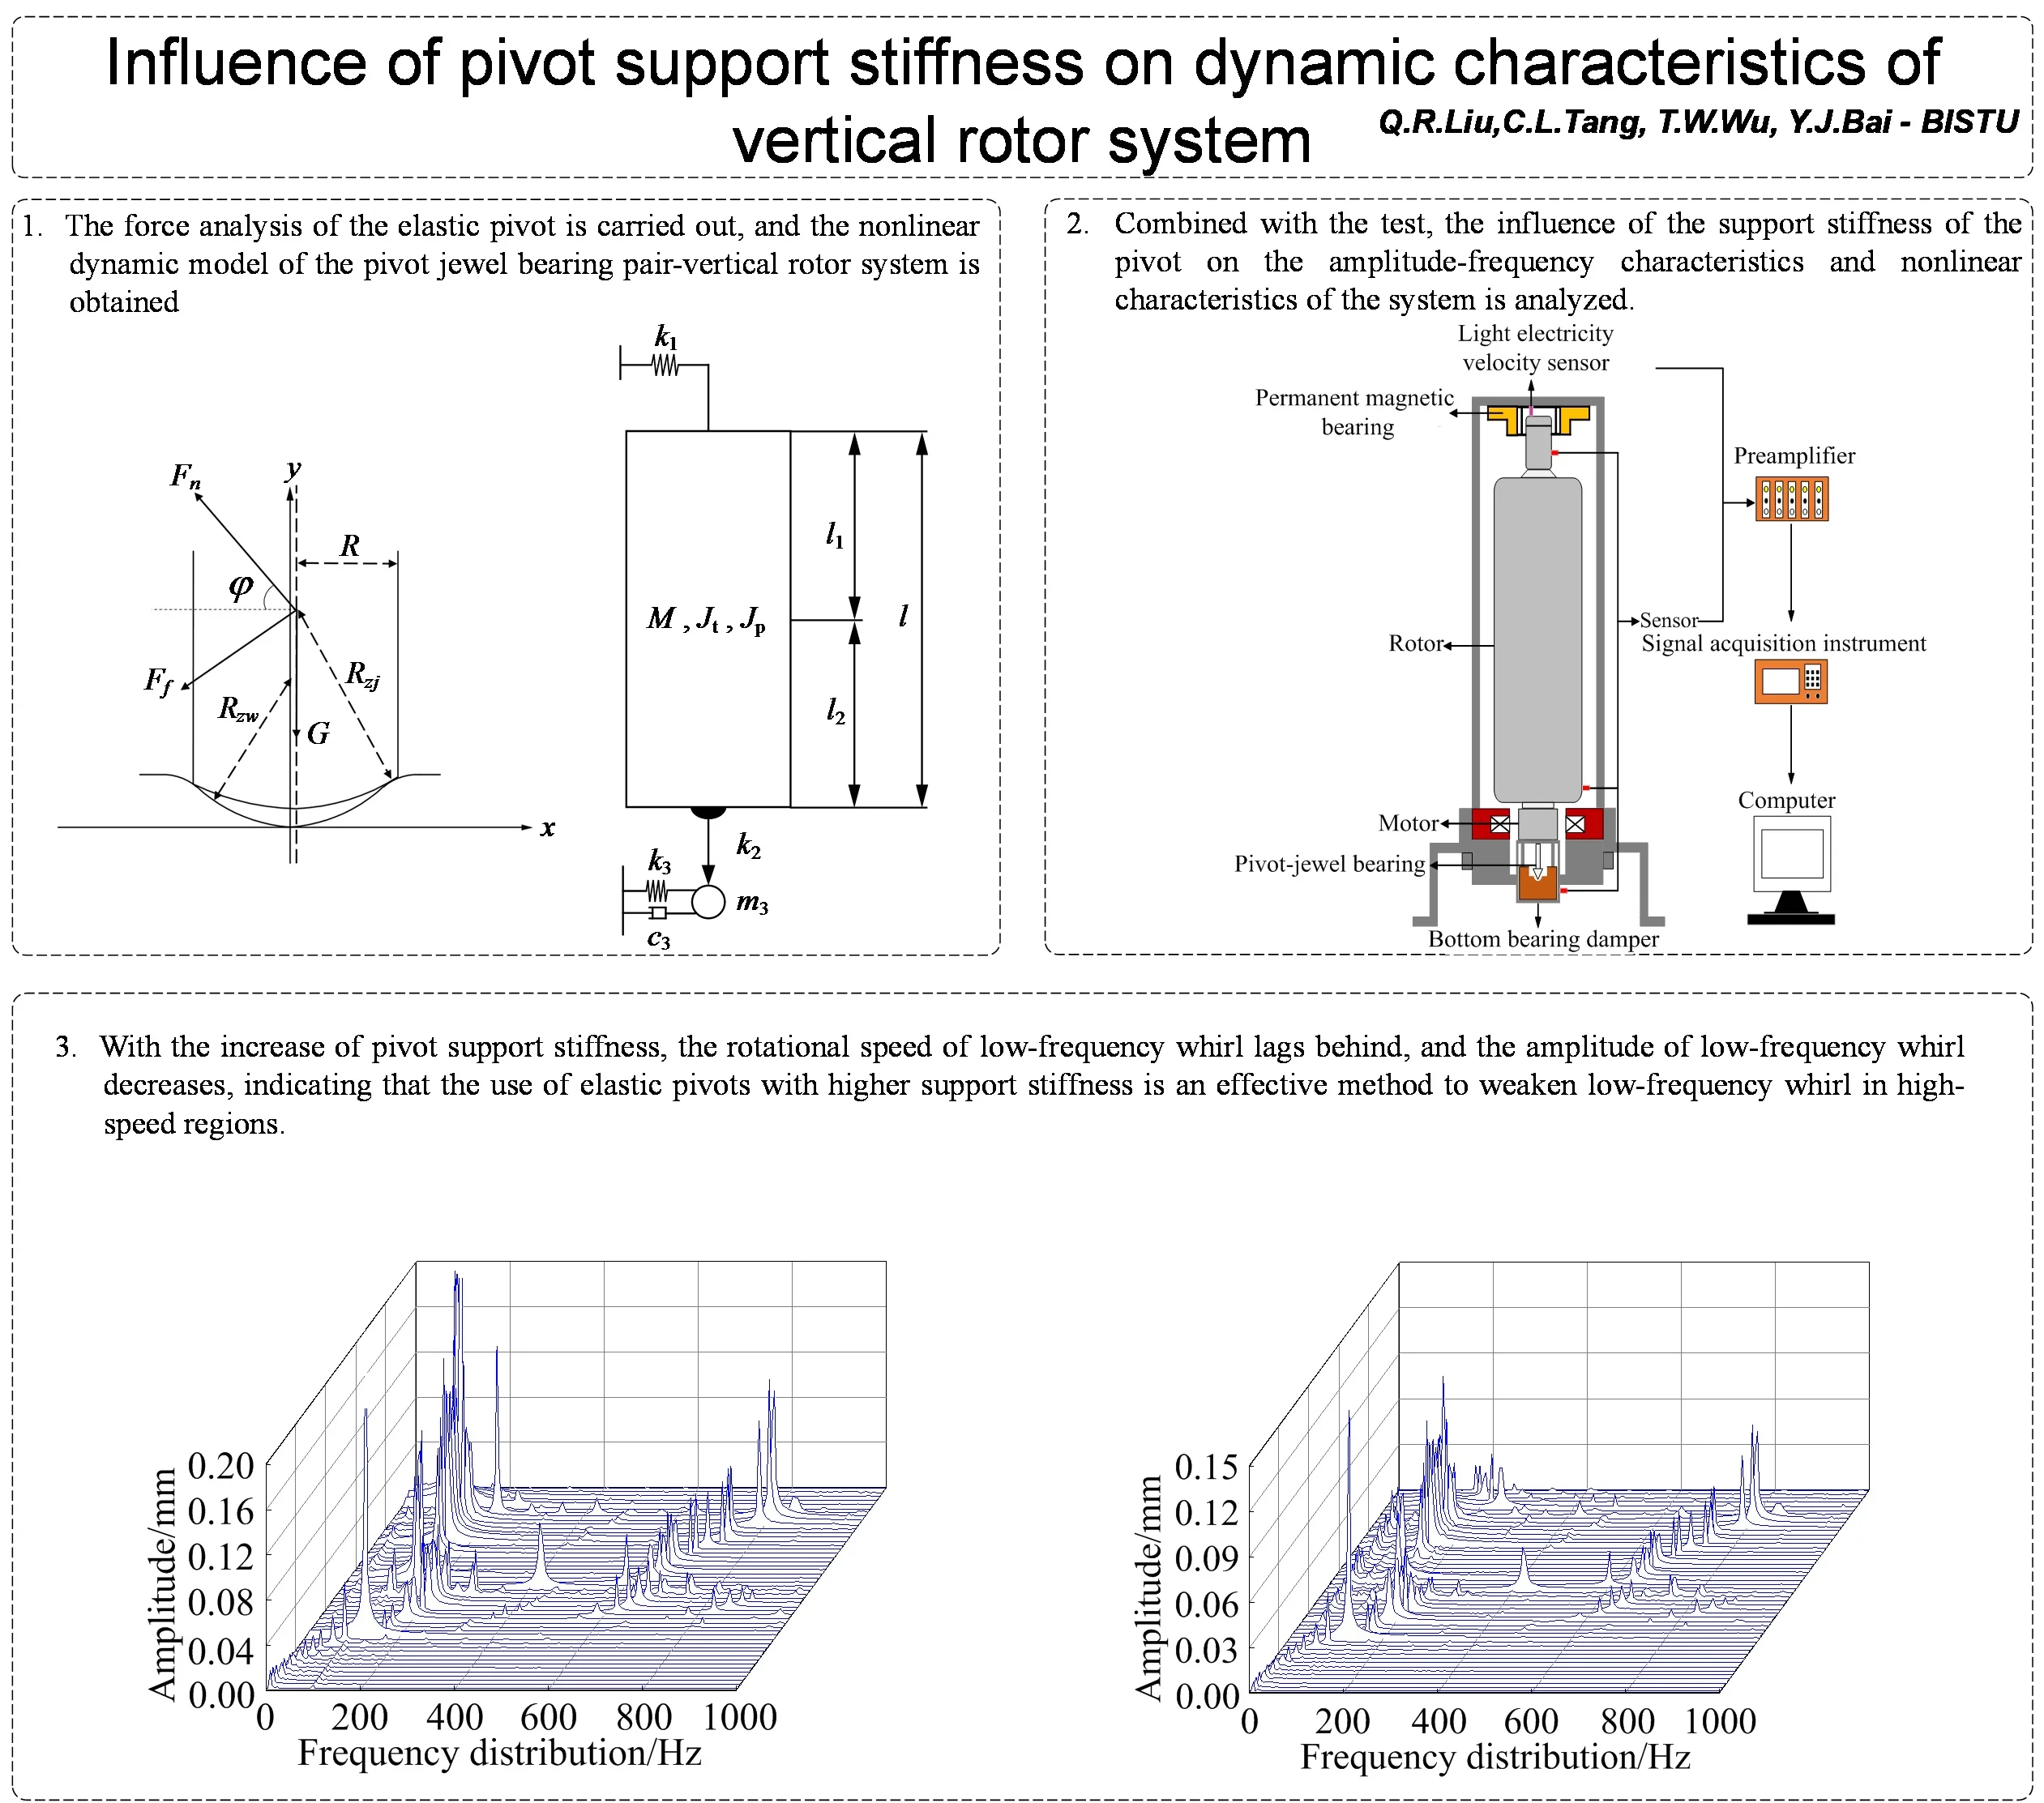 Influence of pivot support stiffness on dynamic characteristics of vertical rotor system